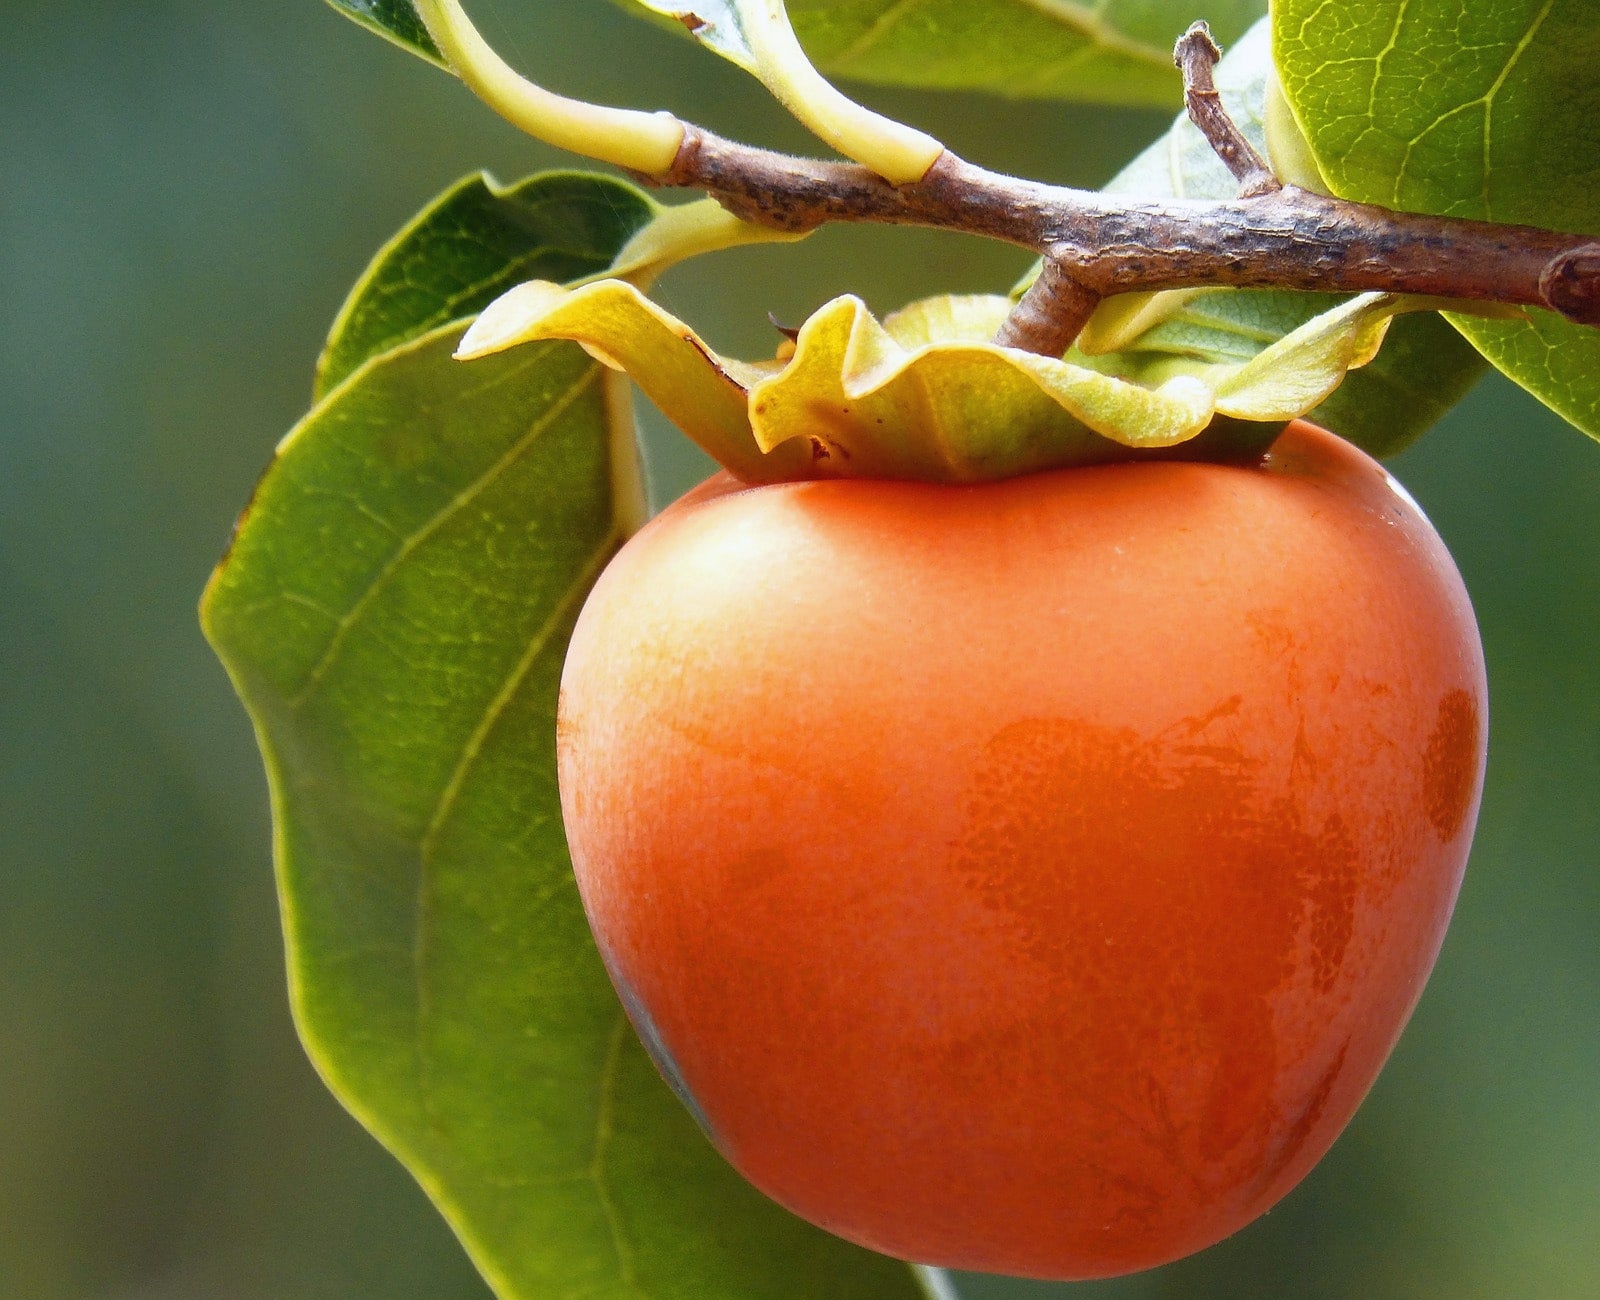 Persimmon Production and Harvest Method